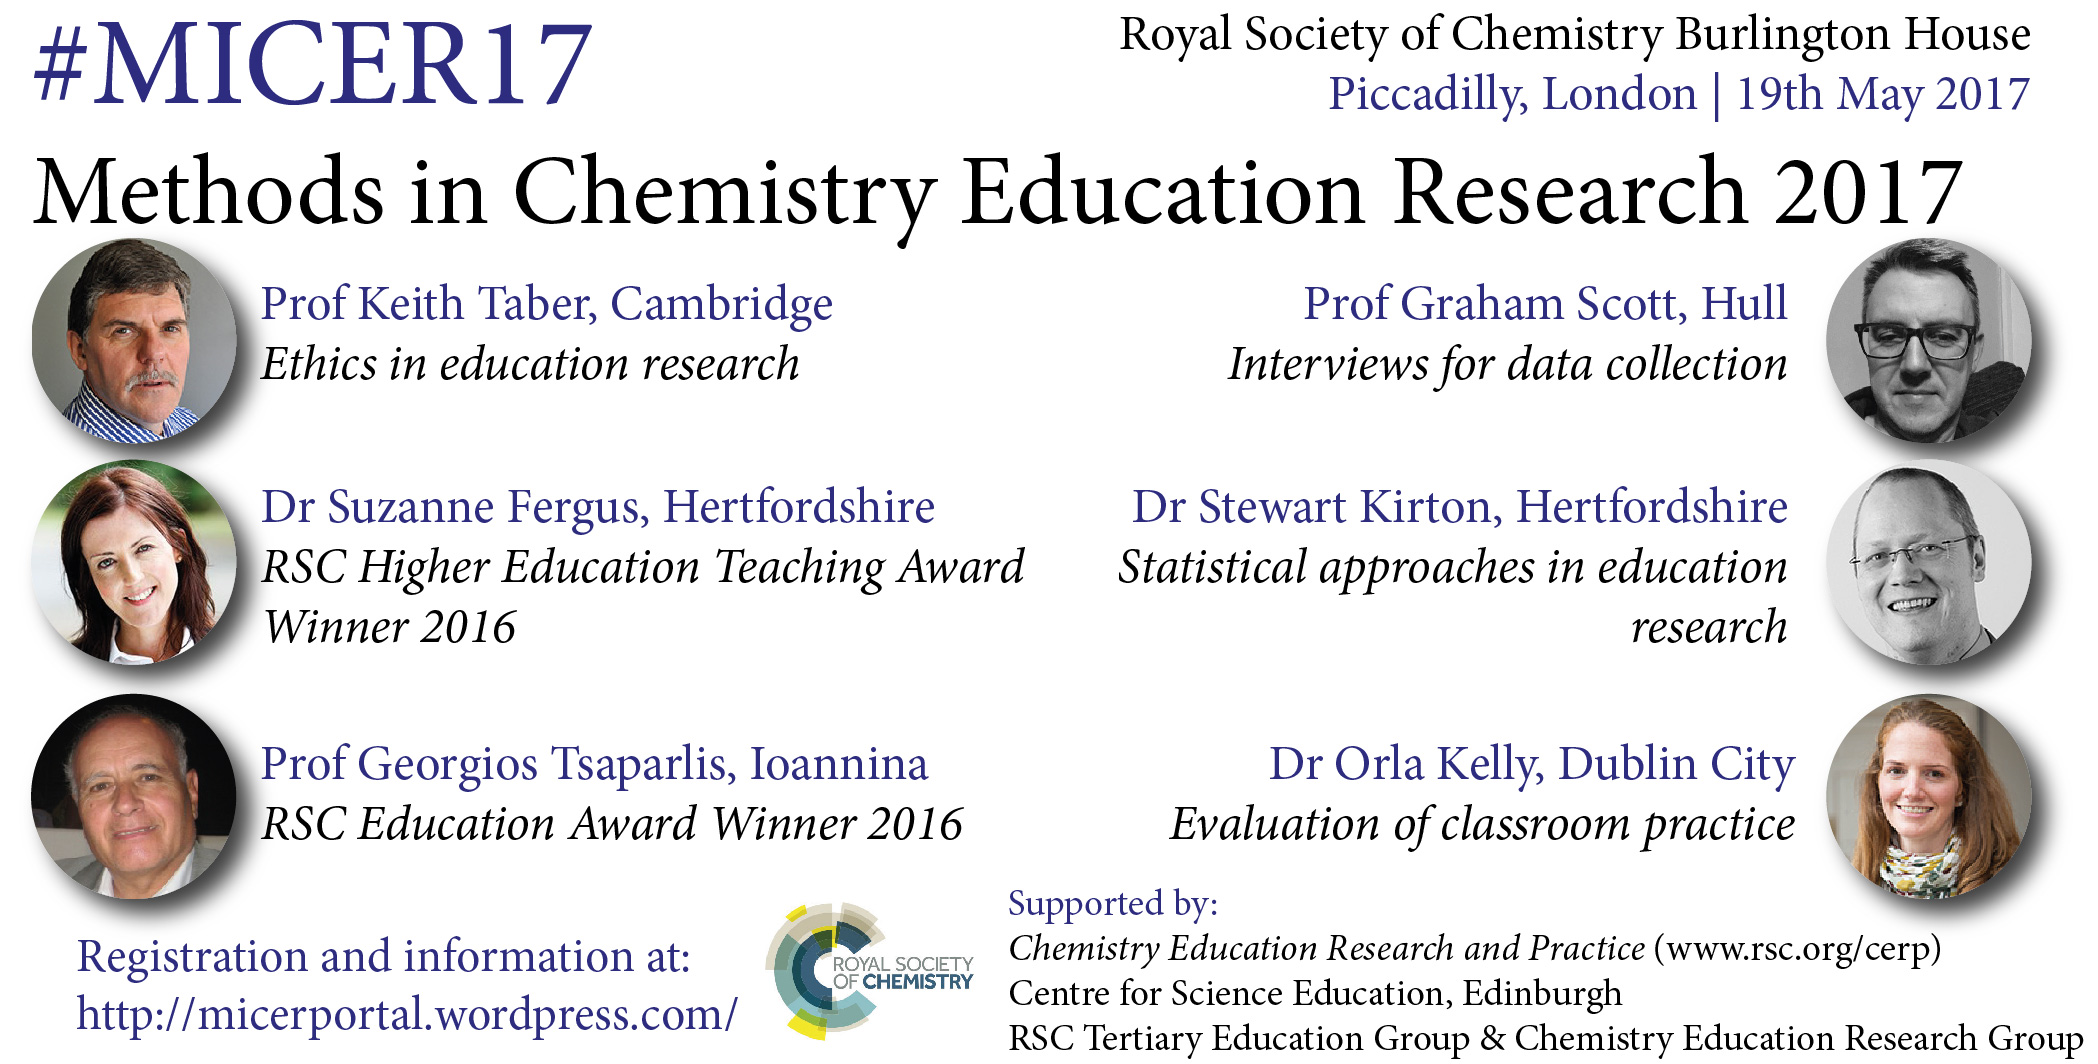 MICER17 Homepage – Methods in Chemistry Education Research Portal